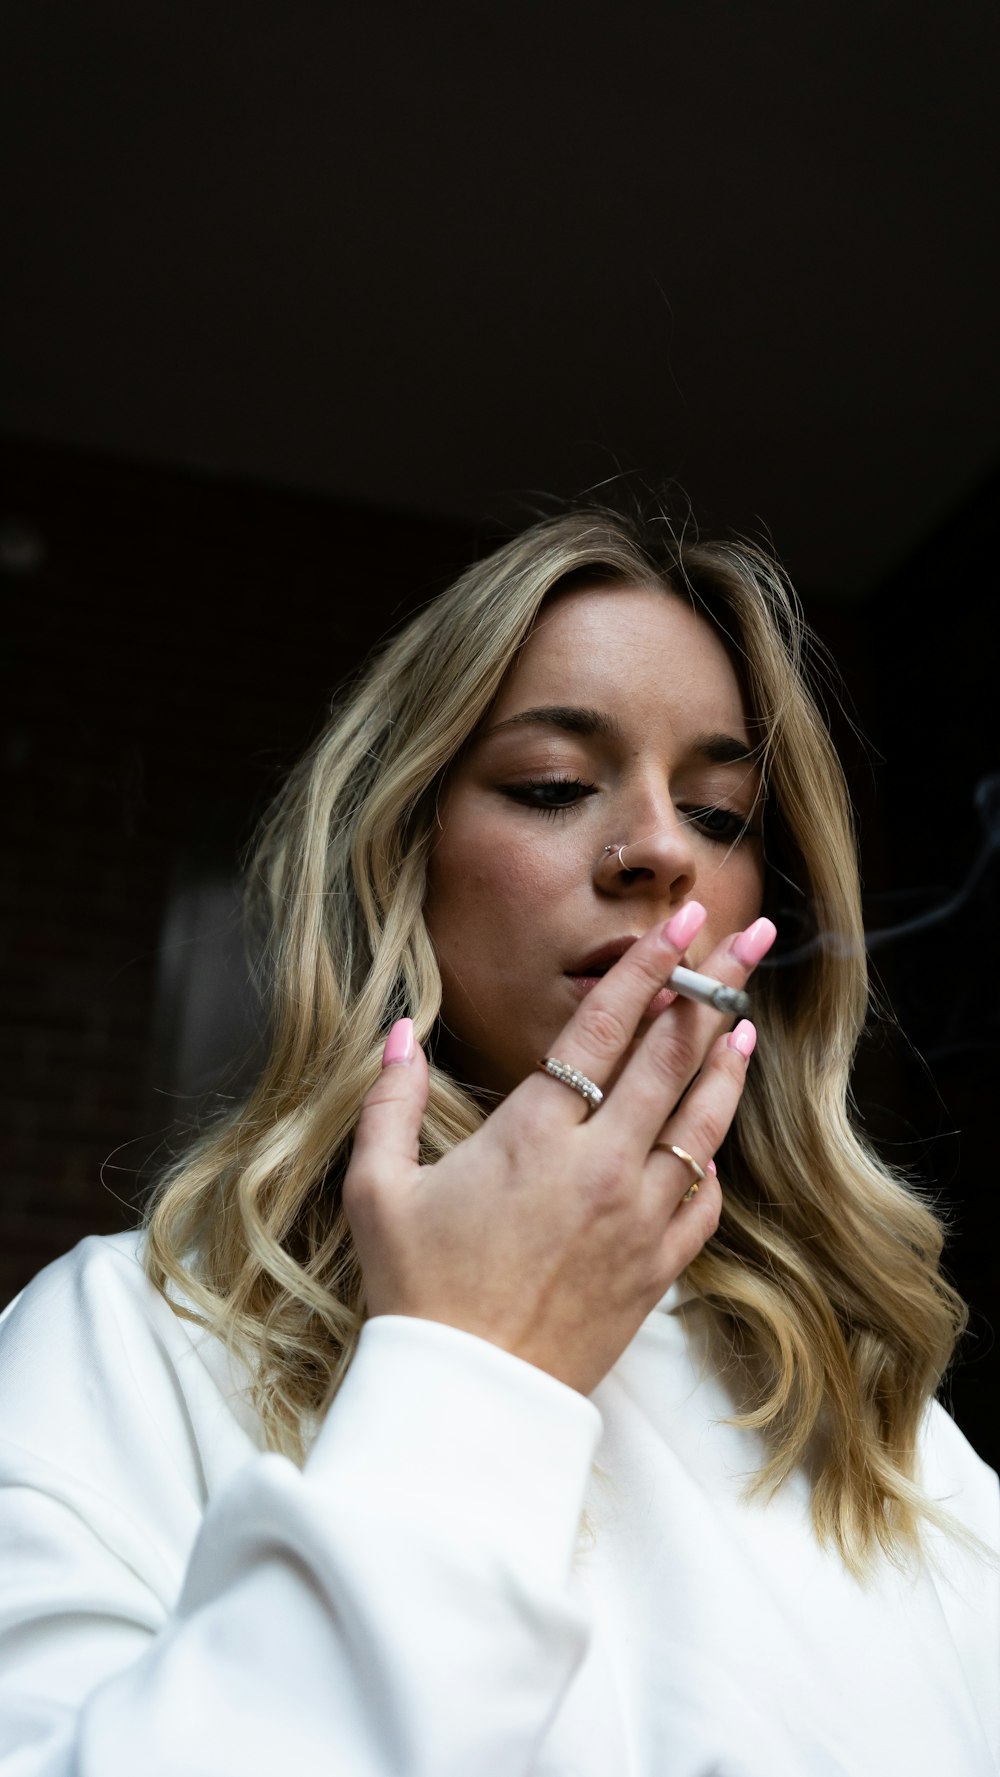 a woman smoking a cigarette in front of a brick wall